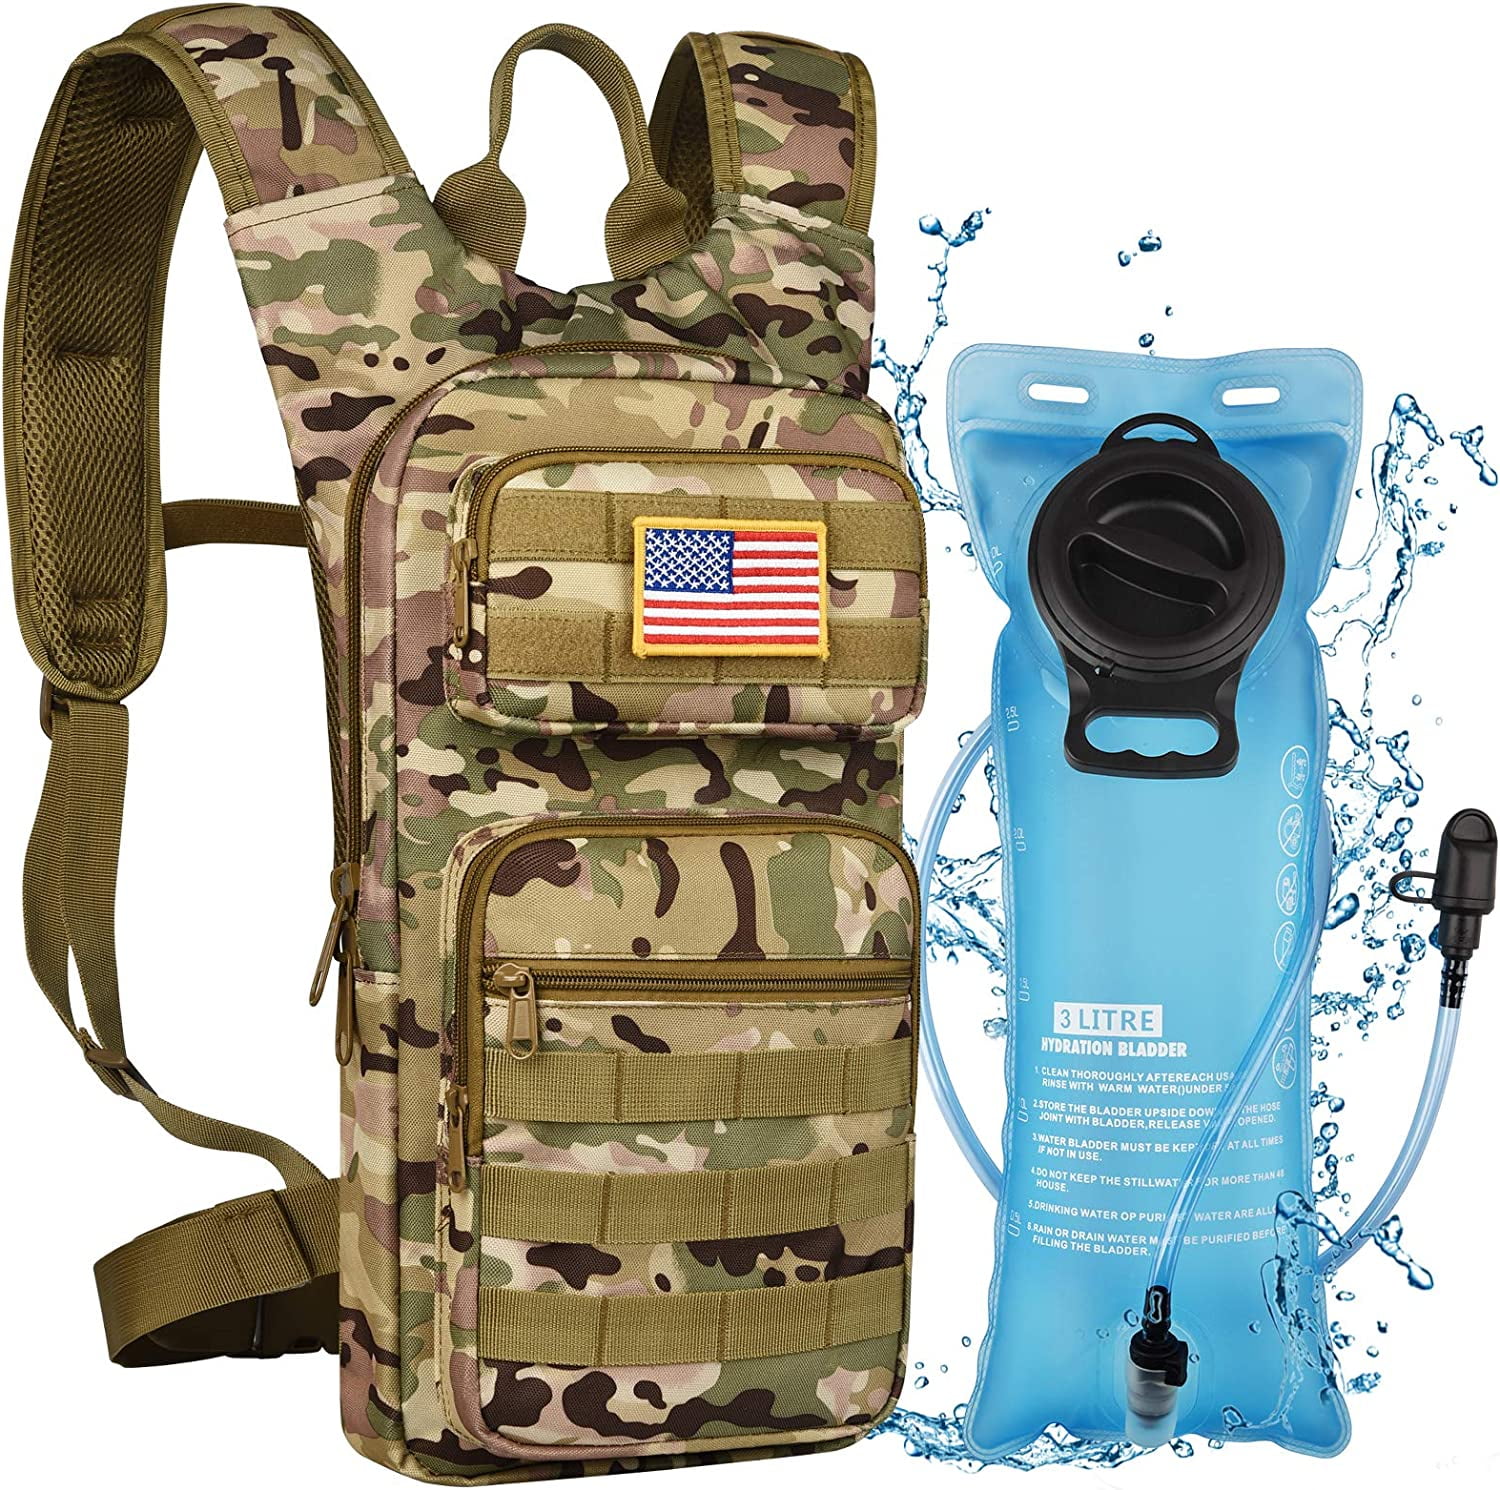 19 Best Backpacks with Water Bottle Pockets - Tested and Reviewed!, Backpackies